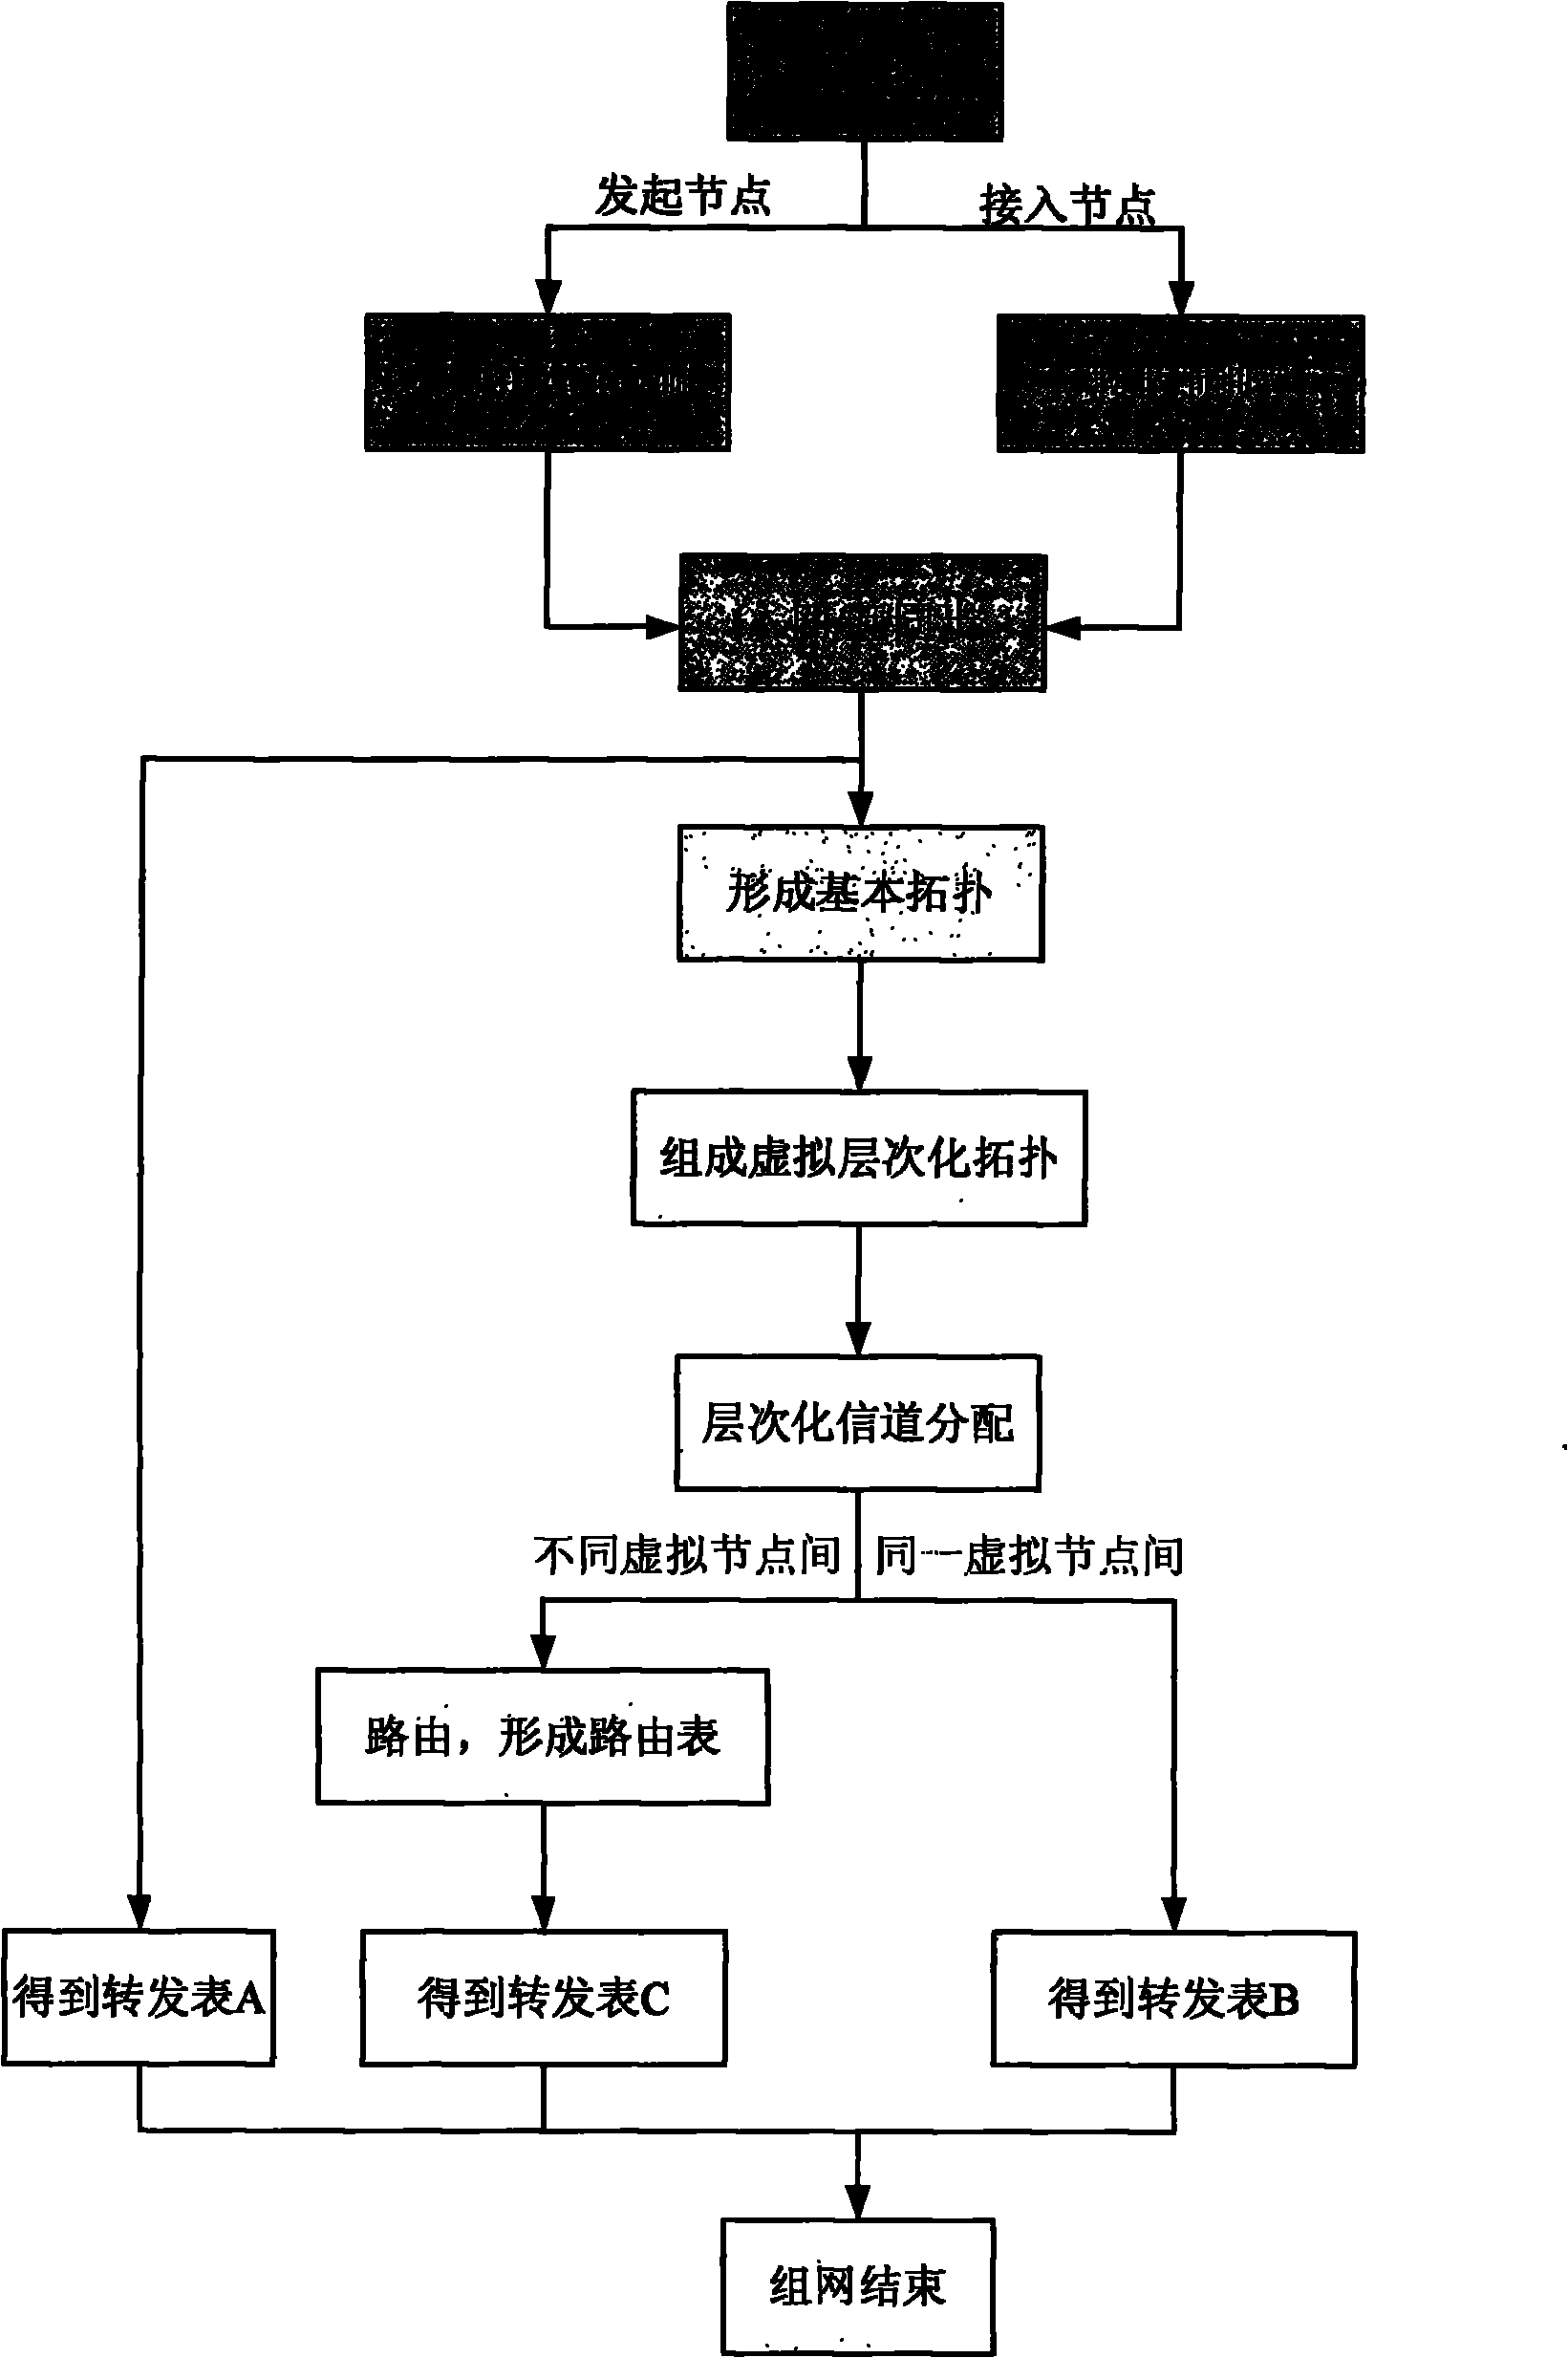 Hierarchical and regular mesh network routing method